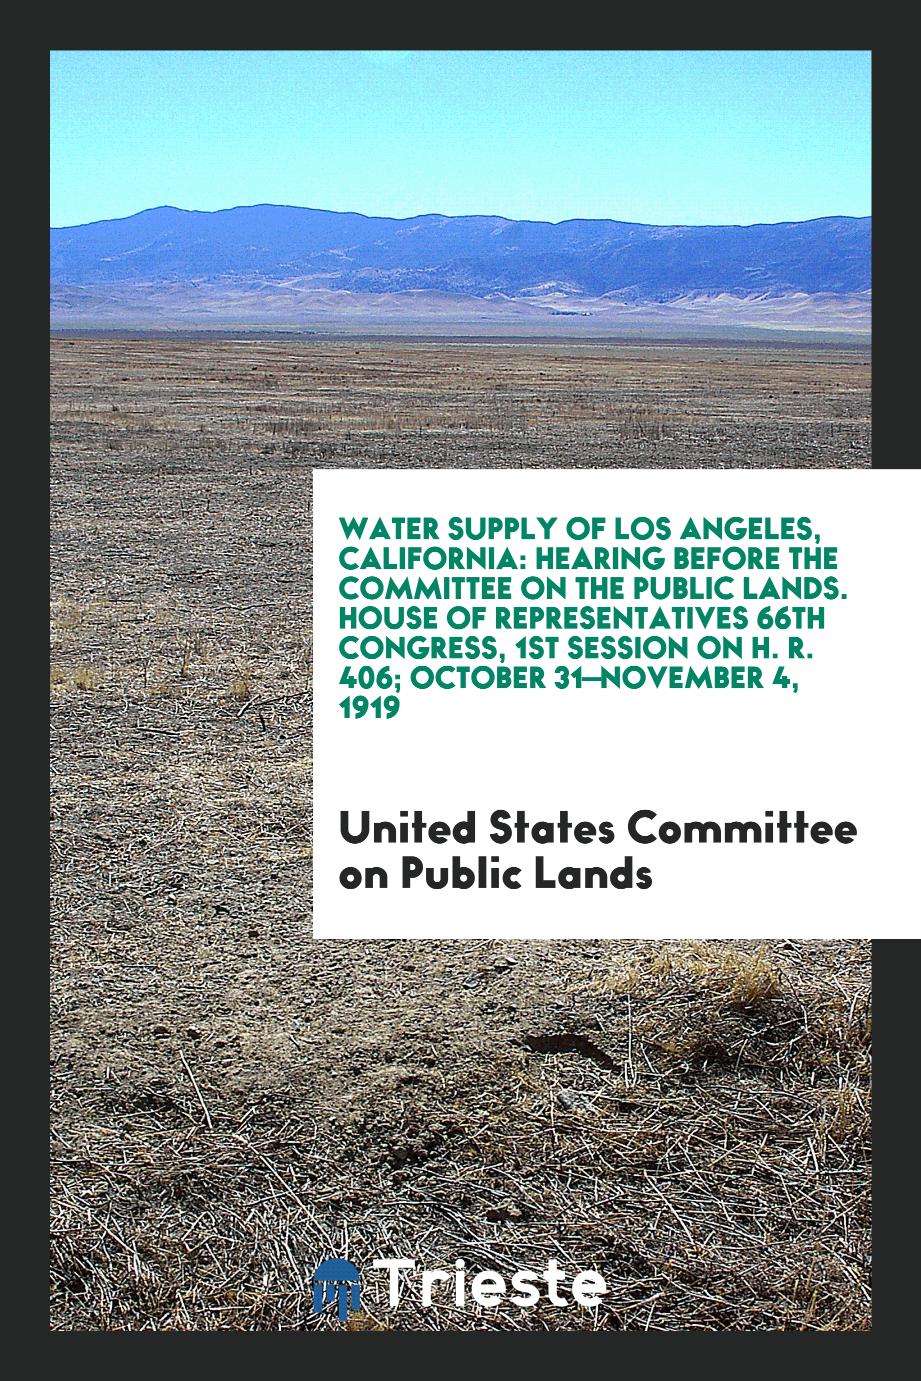 Water Supply of Los Angeles, California: Hearing Before the Committee on the Public Lands. House of Representatives 66th Congress, 1st Session on H. R. 406; October 31—November 4, 1919